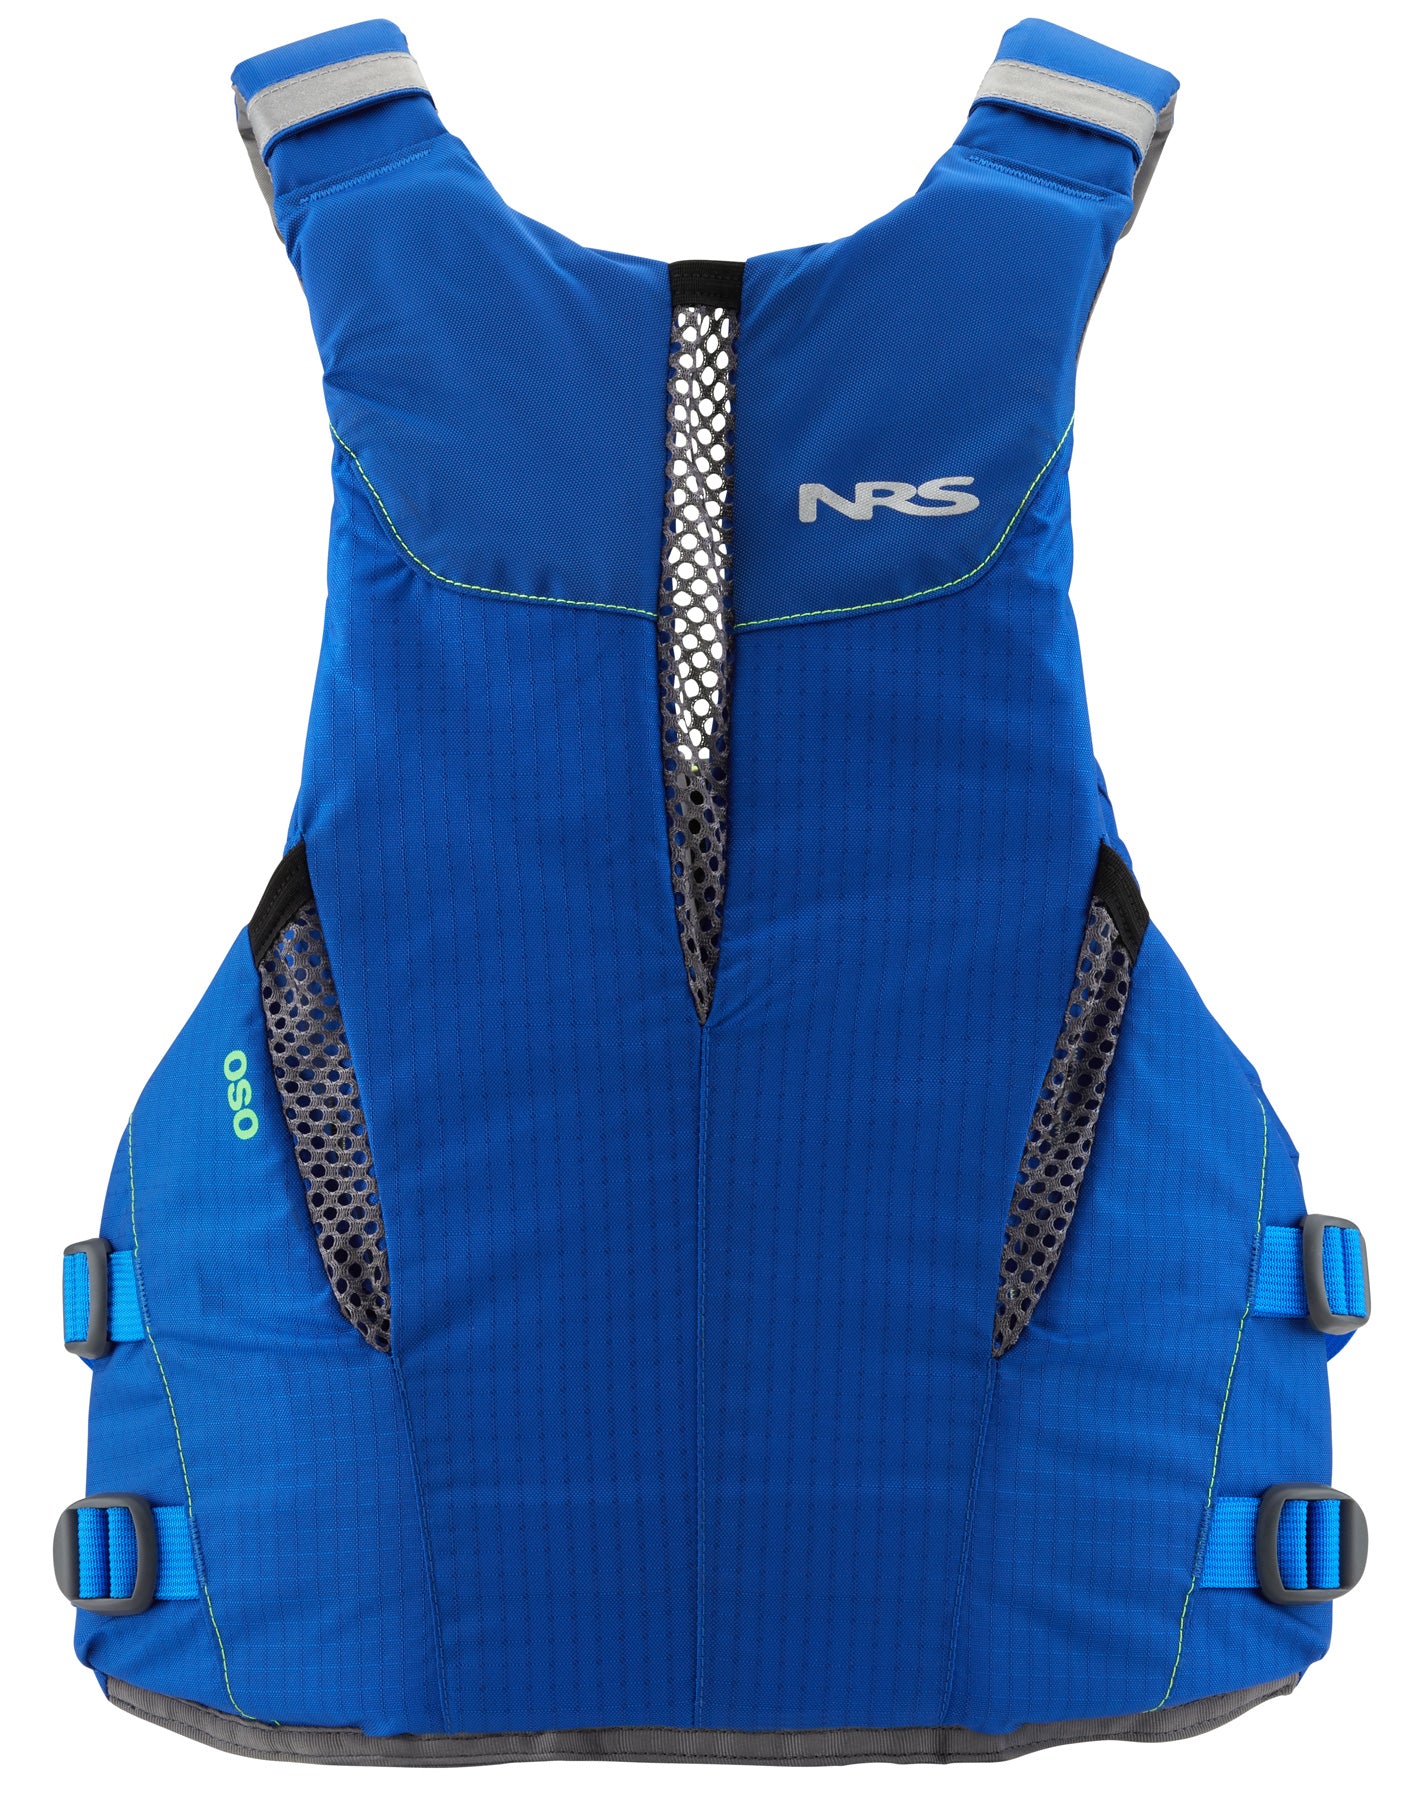 The Rear of the NRS Oso Buoyancy aid in Blue